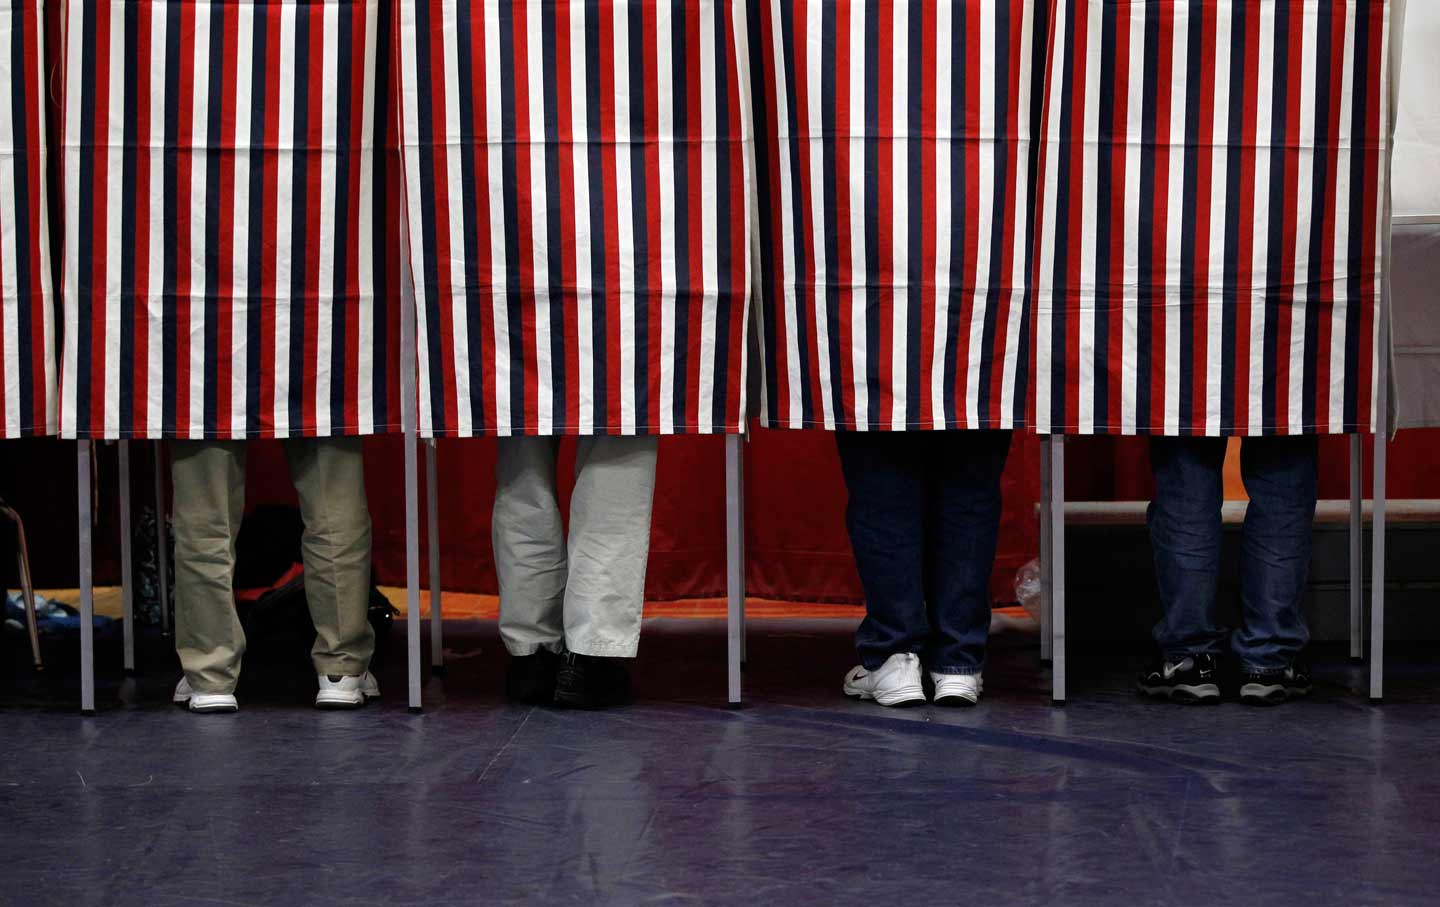 New Hampshire’s New Voter-ID Law Could Lead to Longer Lines, Voter Intimidation